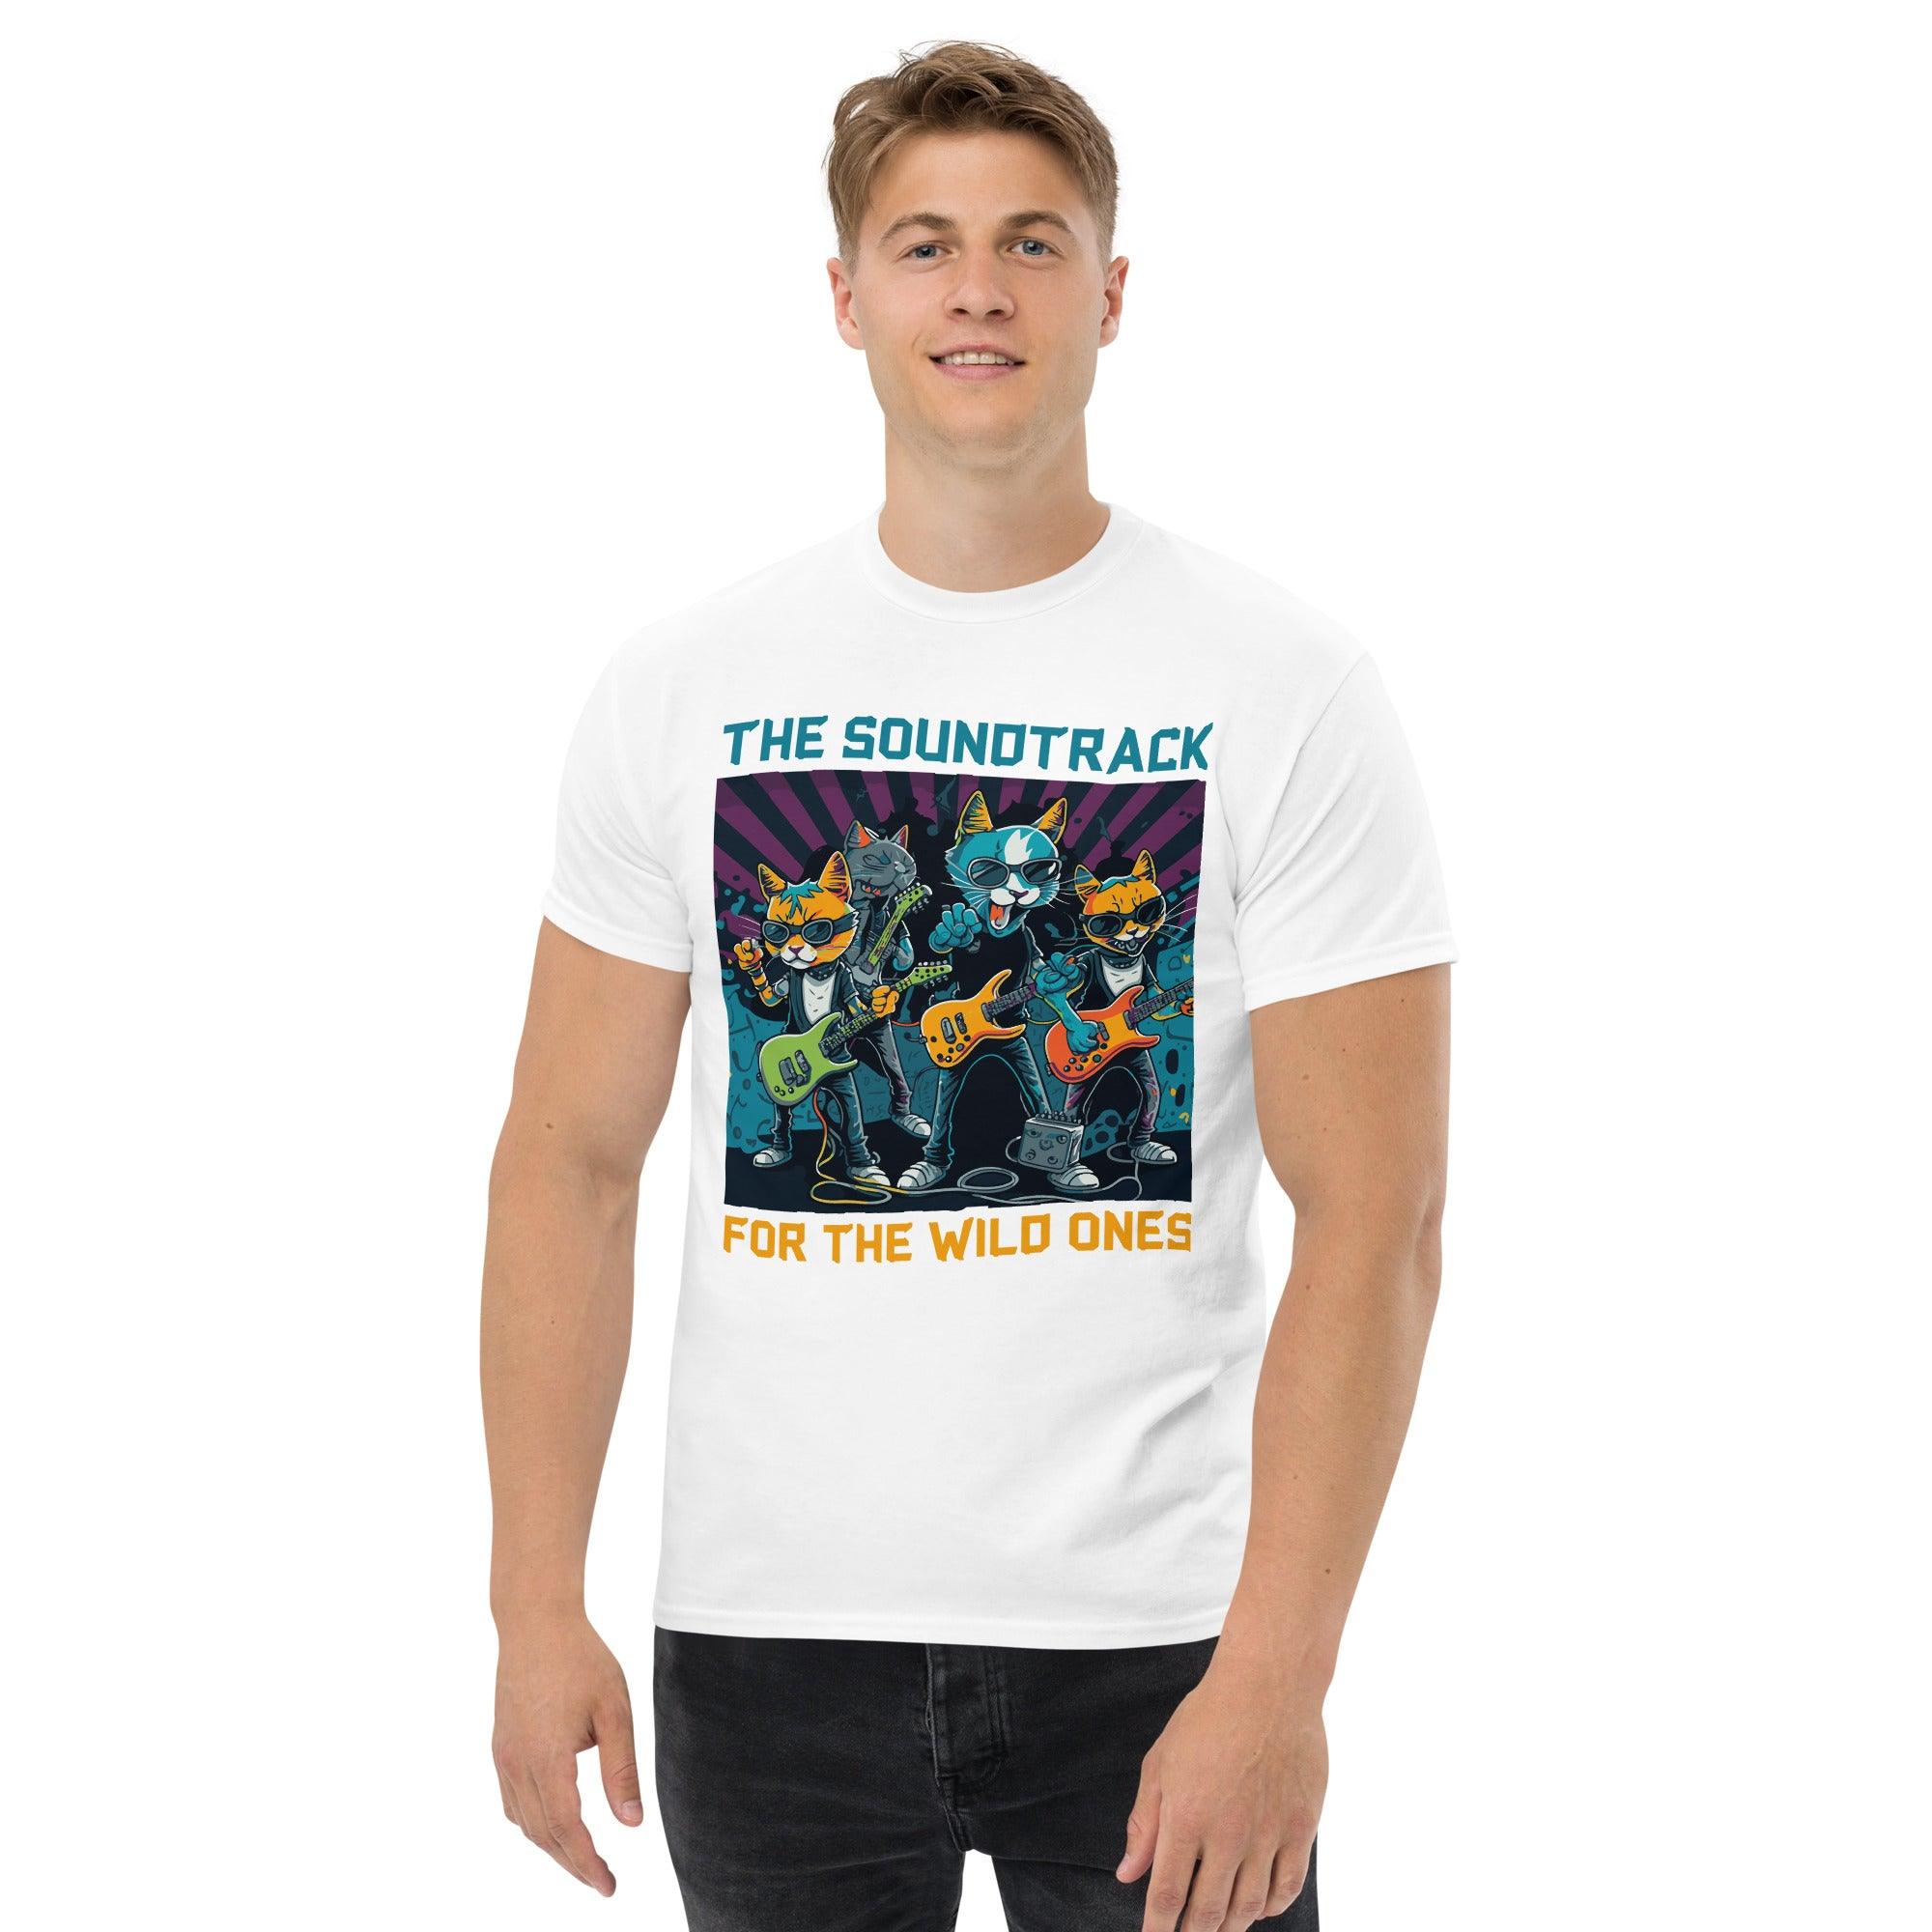 The wild ones men's classic tee - Beyond T-shirts